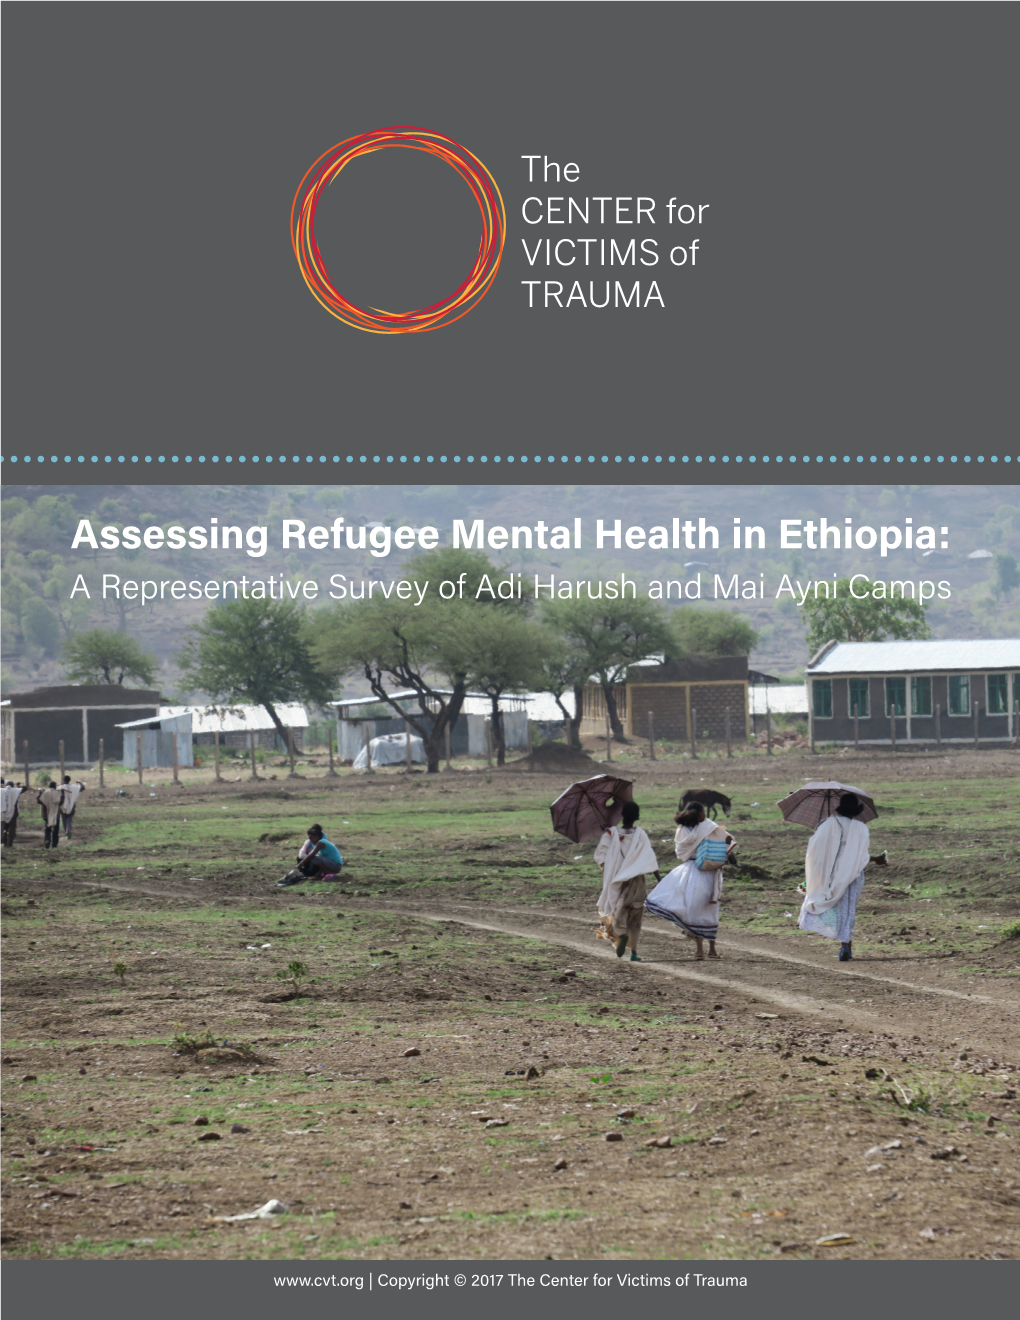 Assessing Refugee Mental Health in Ethiopia: a Representative Survey of Adi Harush and Mai Ayni Camps